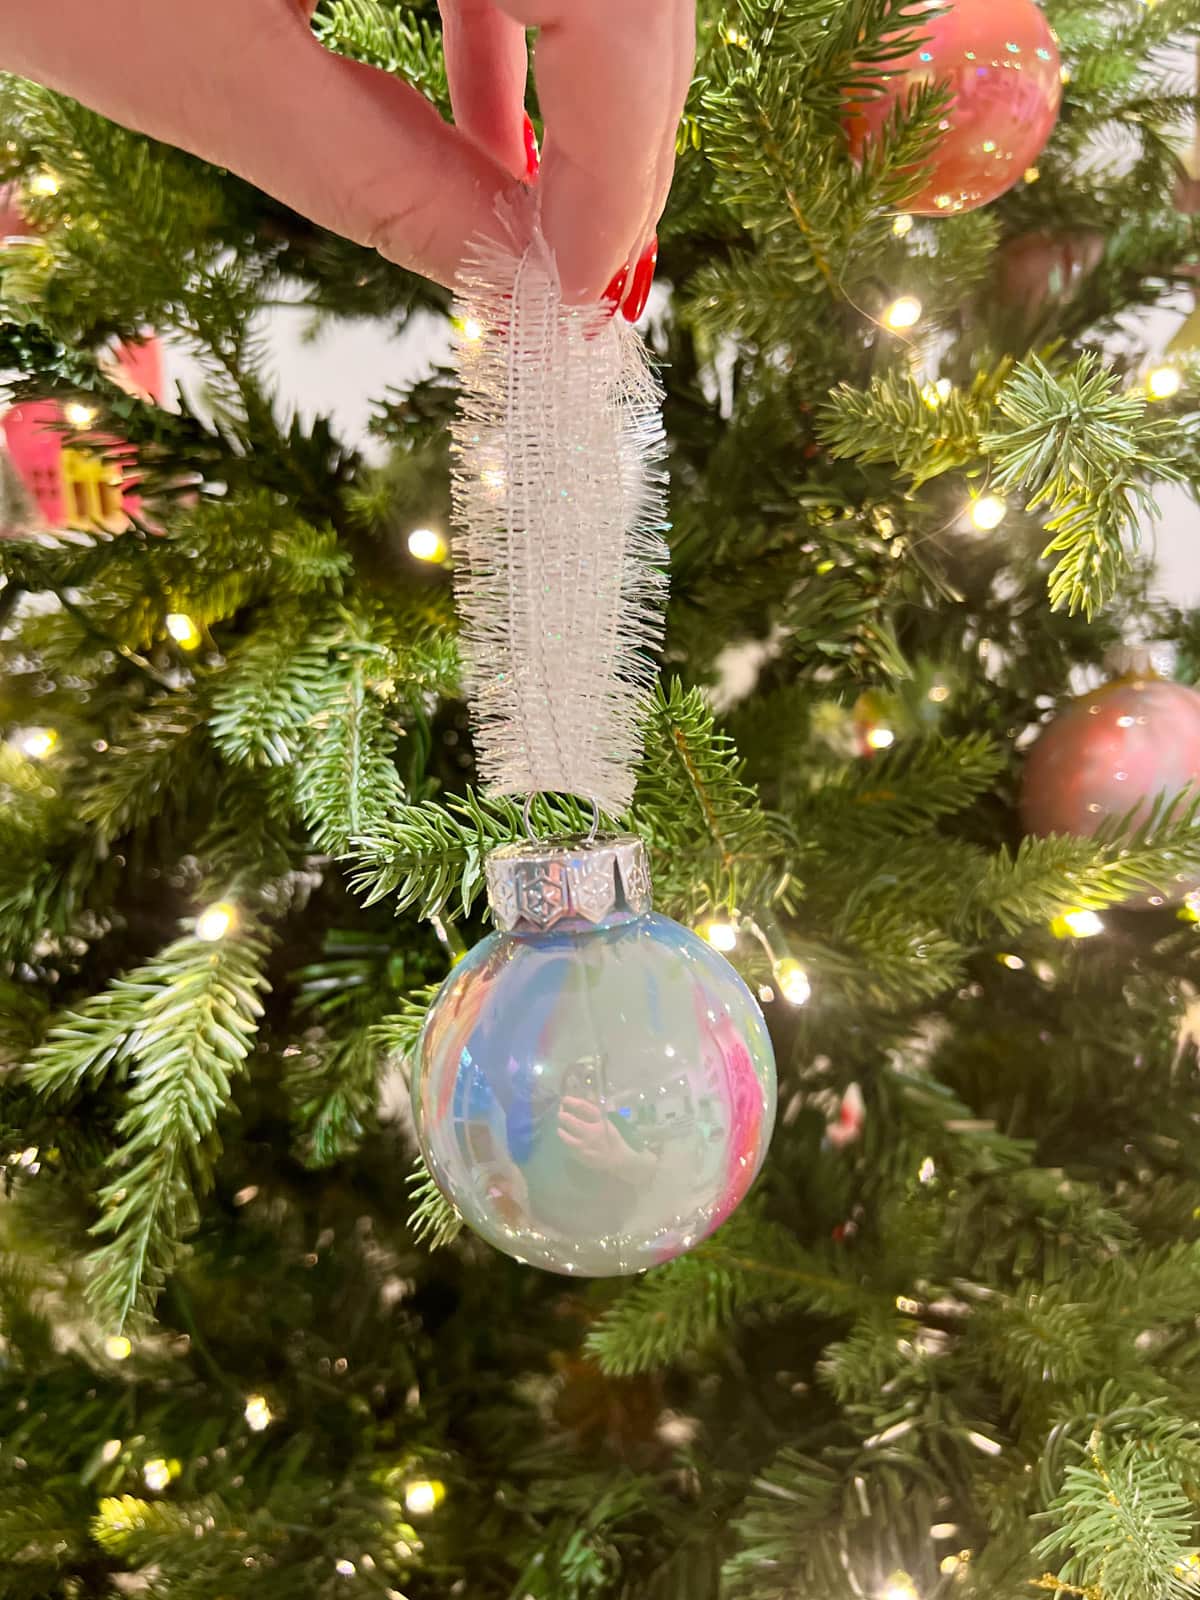 ornament hanging by ribbon